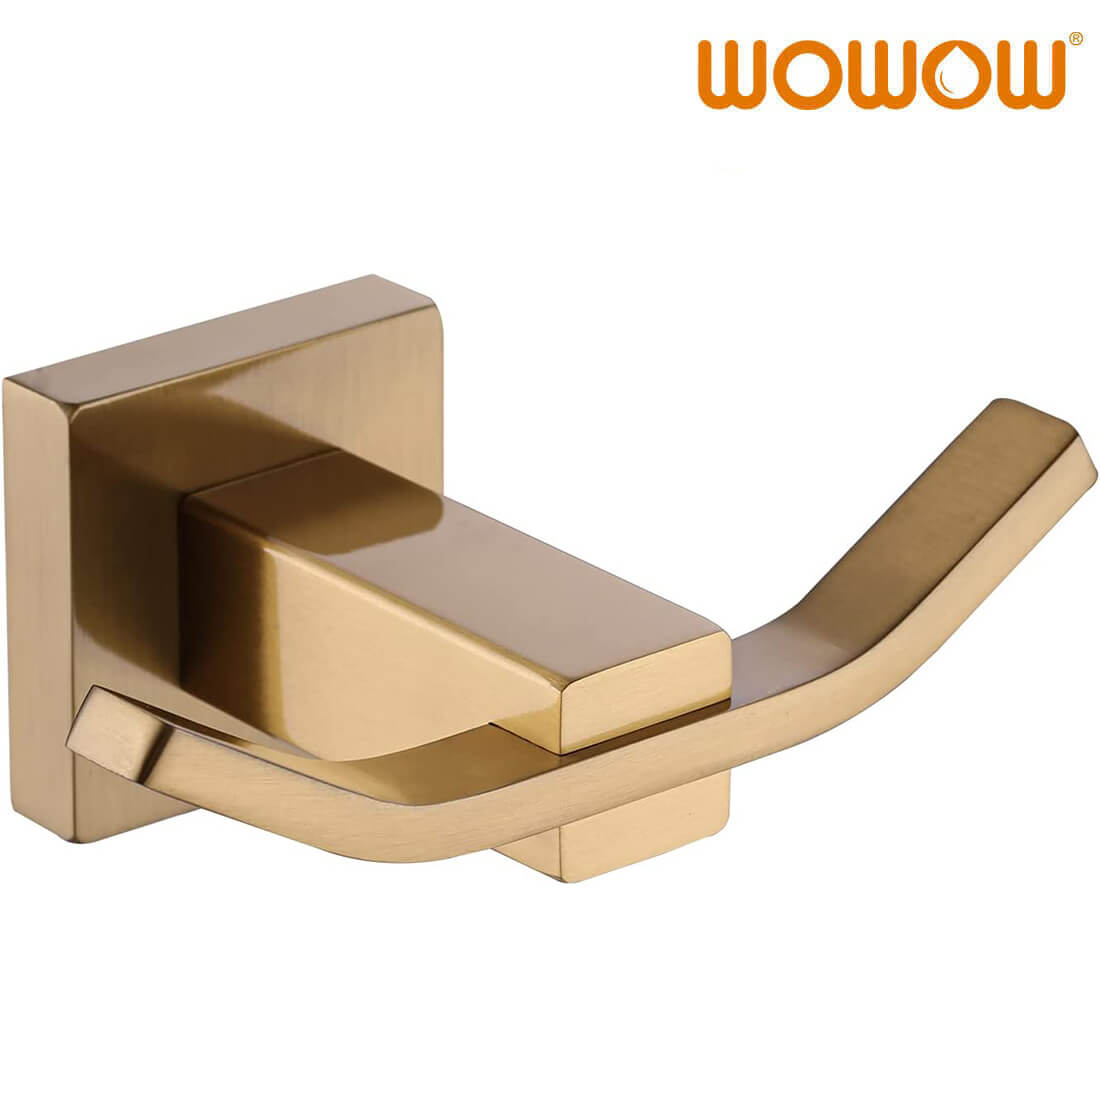 wowow brushed gold sus 304 stainless steel double towel hooks 7